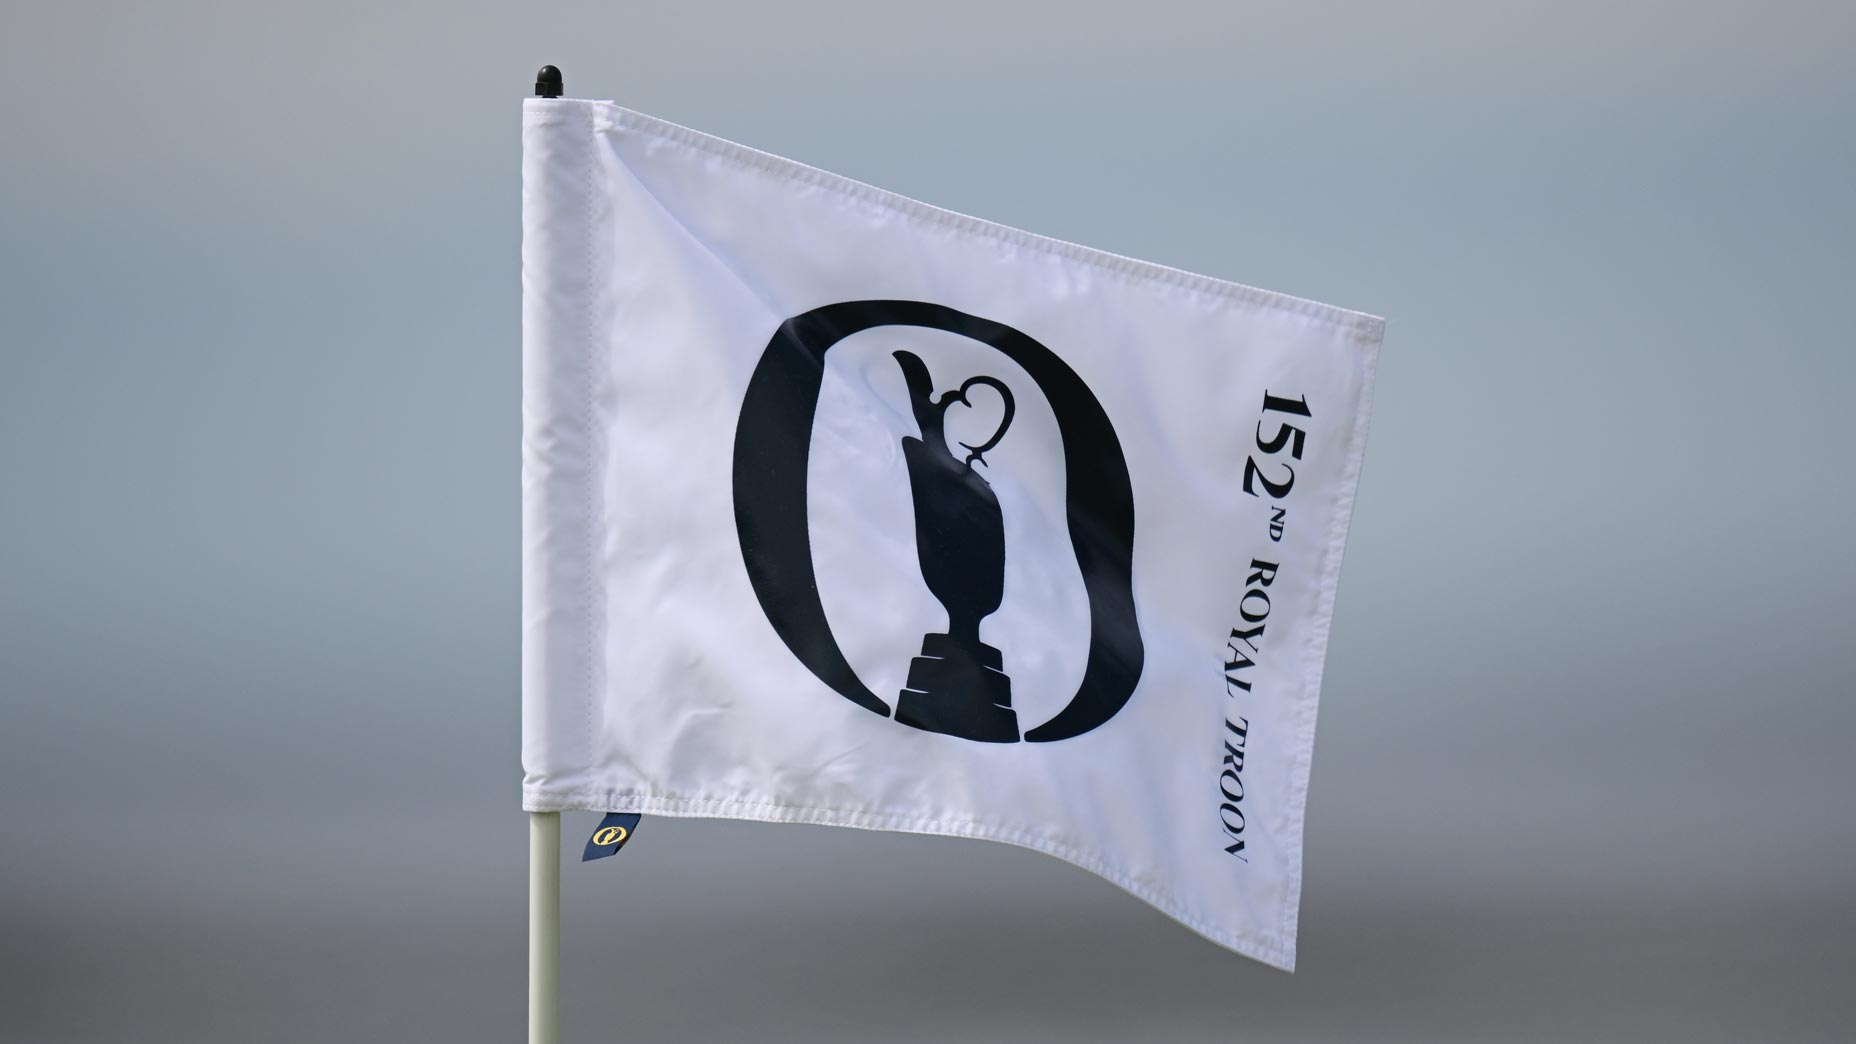 A white 2024 Open Championship flag flies with overcast skies behind it at Royal Troon